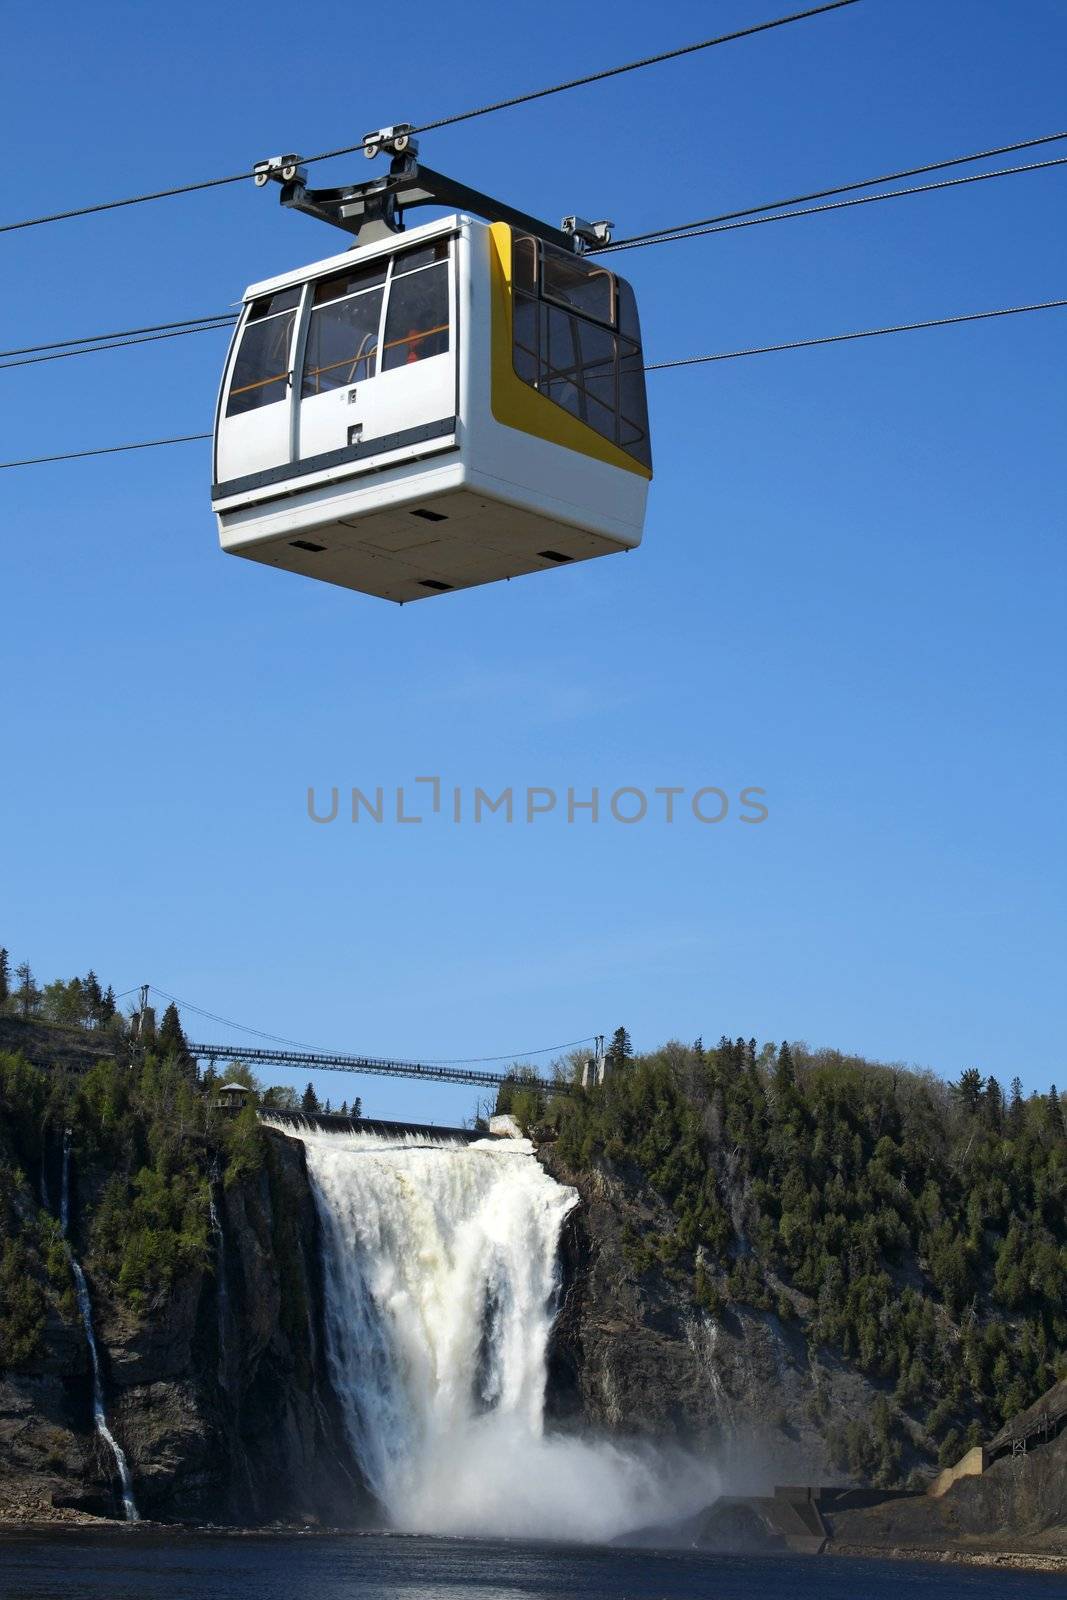 Cable car going up to the waterfall on the mountain.